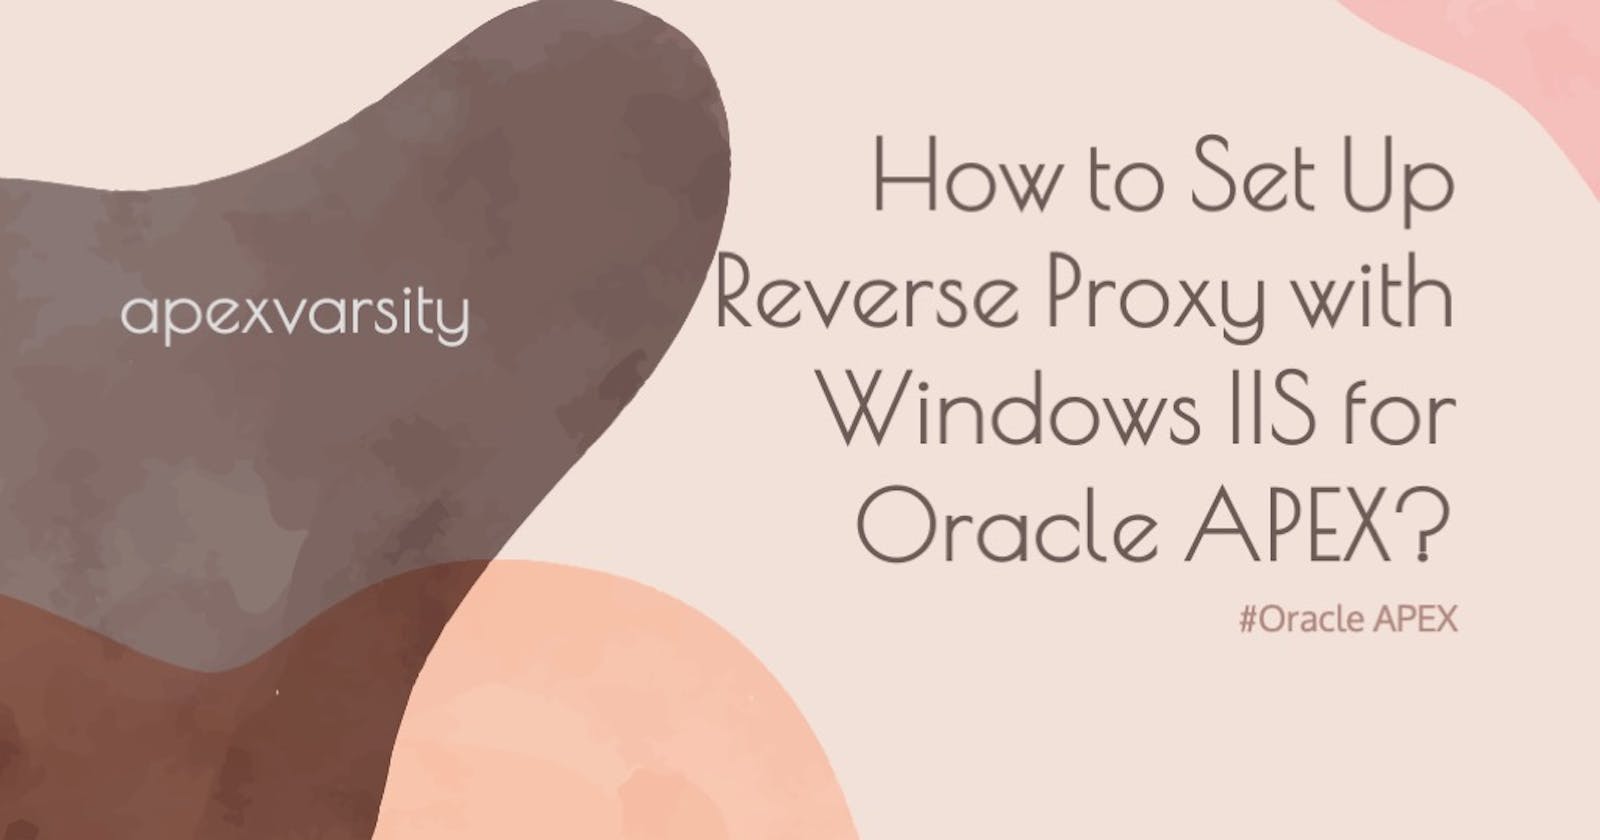 How to Set Up Reverse Proxy with Windows IIS for Oracle APEX?